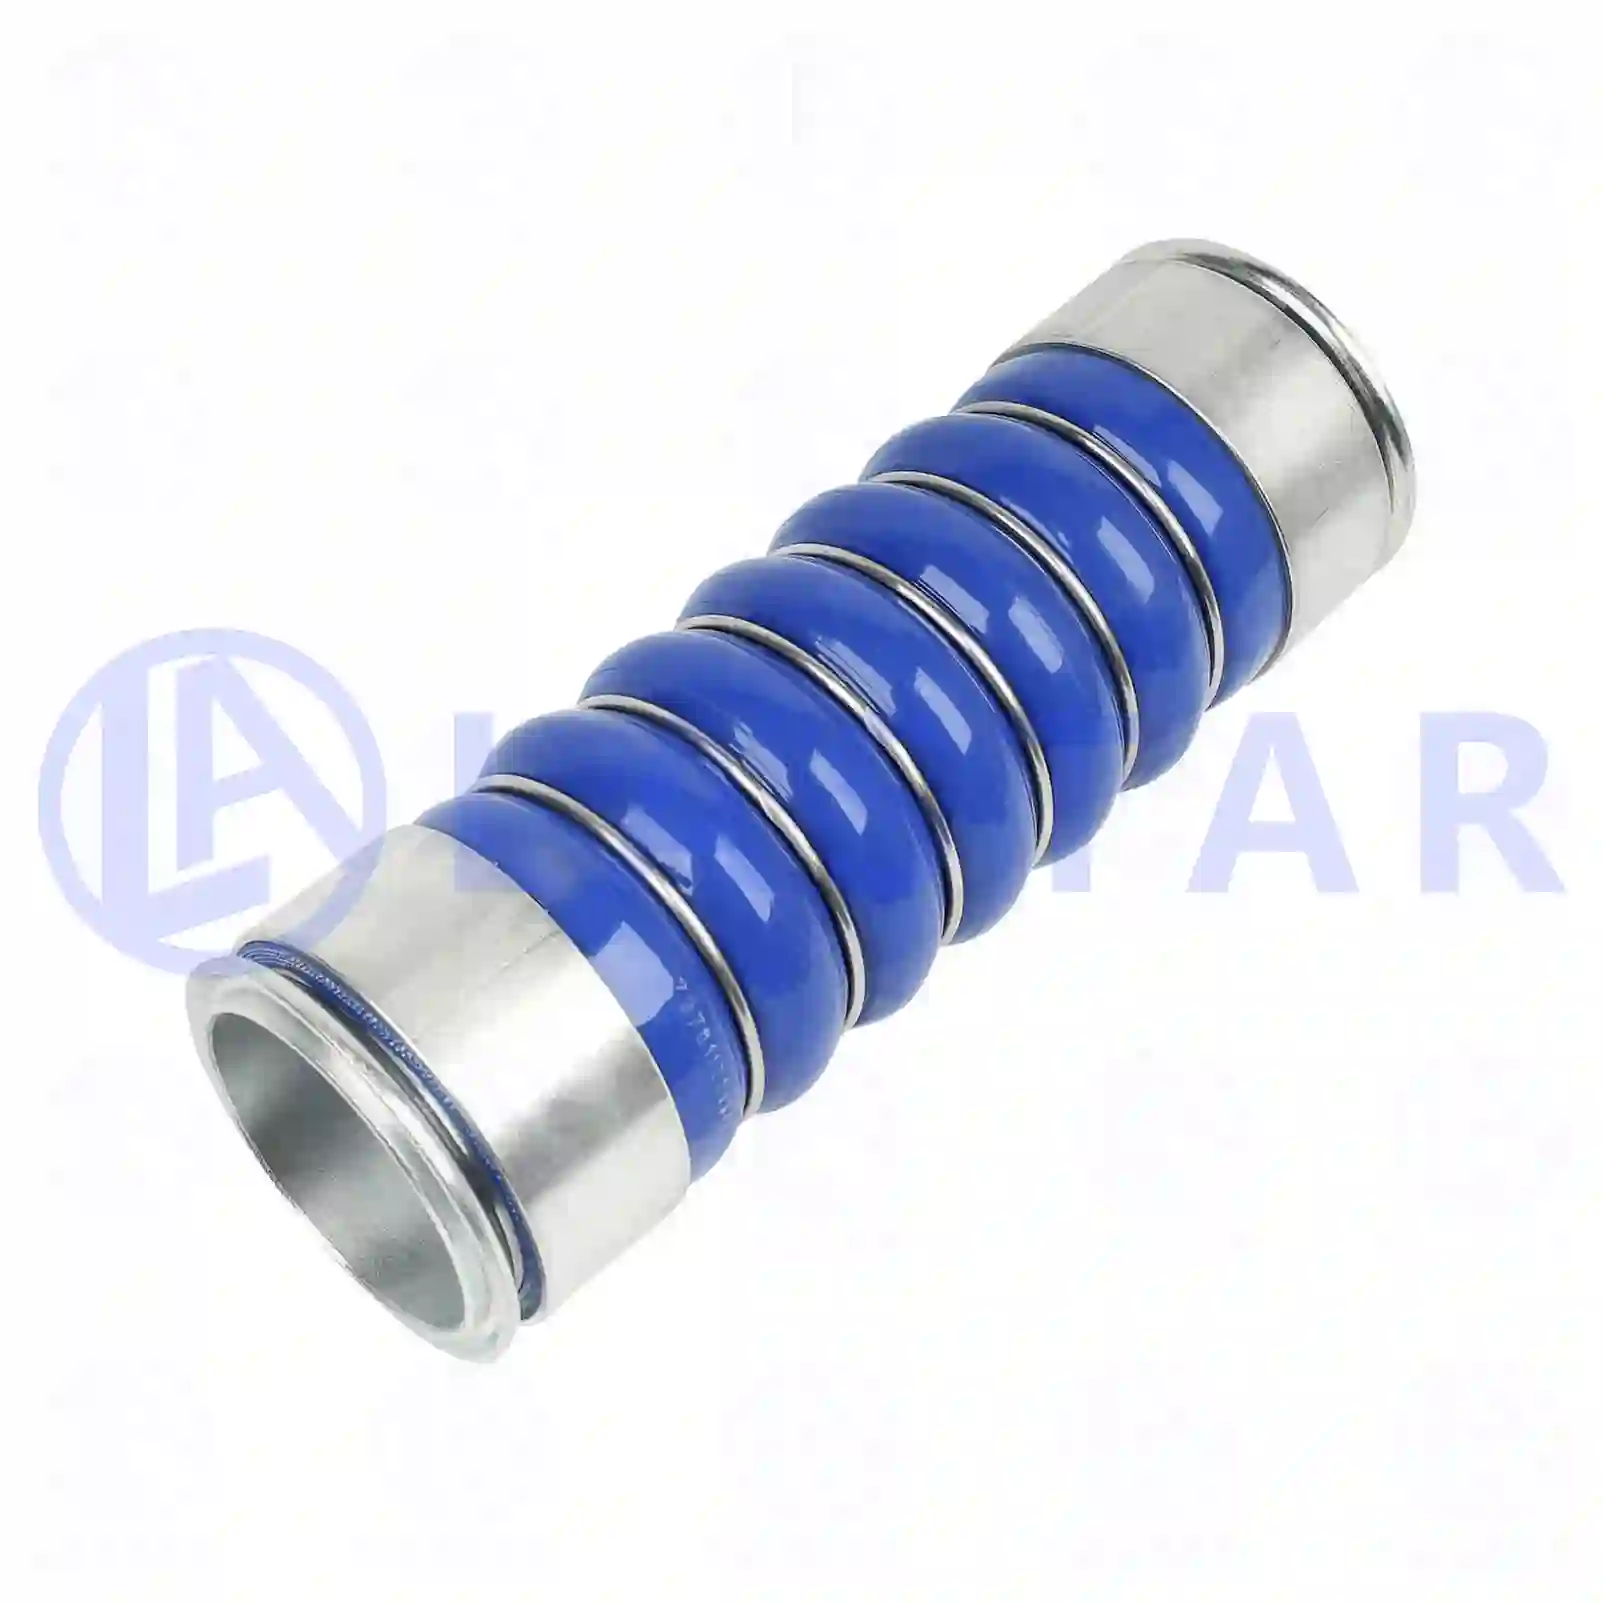 Charge air hose, 77708189, 1675097, 1675579, 1676744, 20441625, 476828, ZG00291-0008 ||  77708189 Lastar Spare Part | Truck Spare Parts, Auotomotive Spare Parts Charge air hose, 77708189, 1675097, 1675579, 1676744, 20441625, 476828, ZG00291-0008 ||  77708189 Lastar Spare Part | Truck Spare Parts, Auotomotive Spare Parts